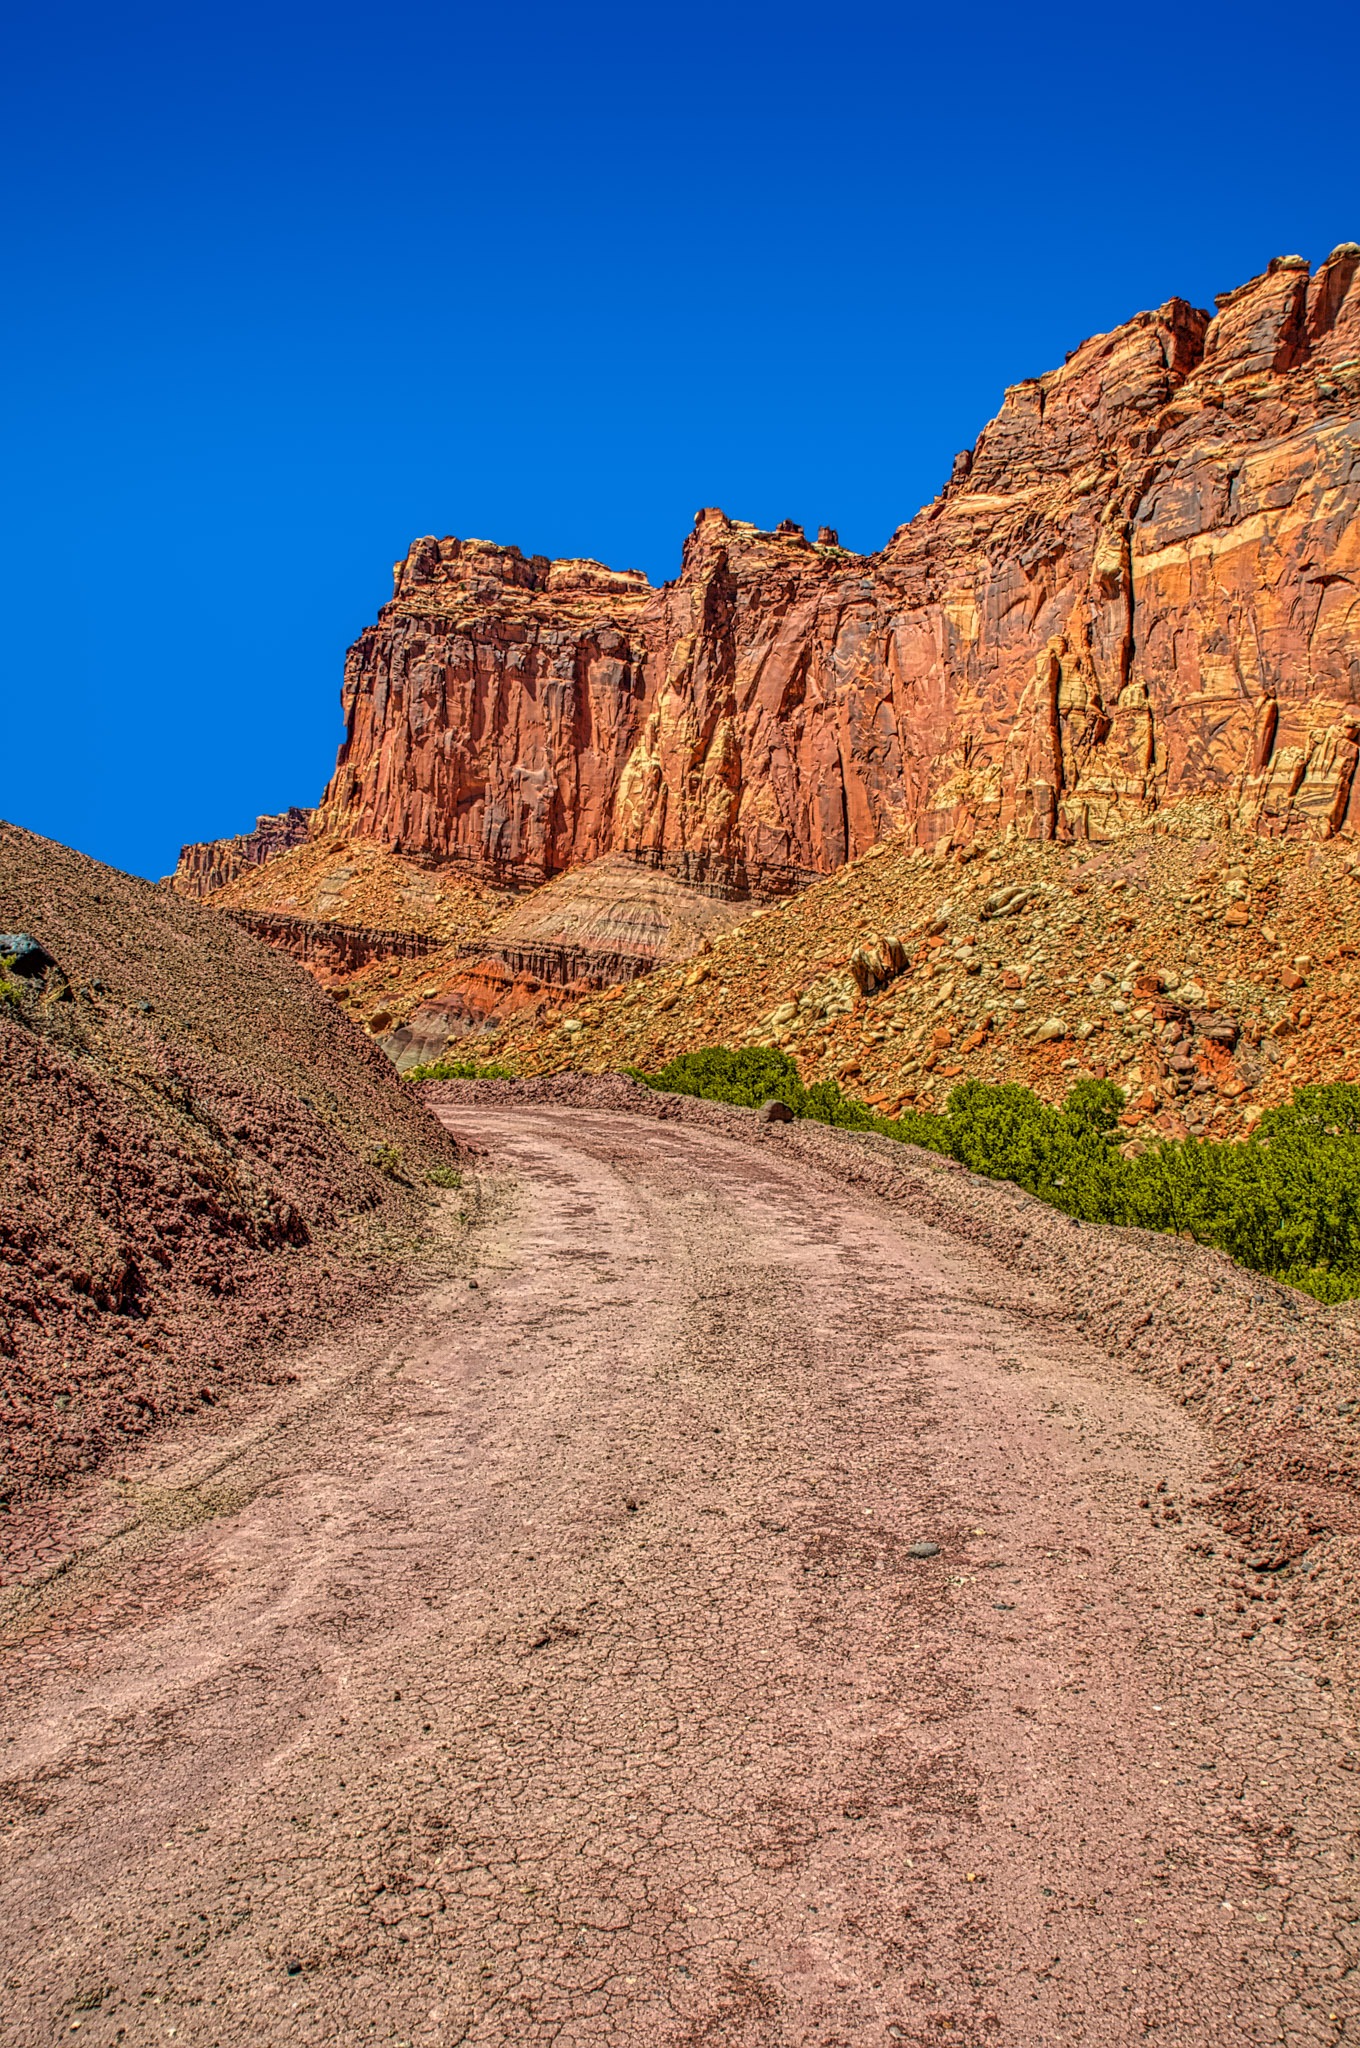 This dirt road heads south from Camp Ground Road, in the Fruita District of Capitol Reef National Park in Utah.